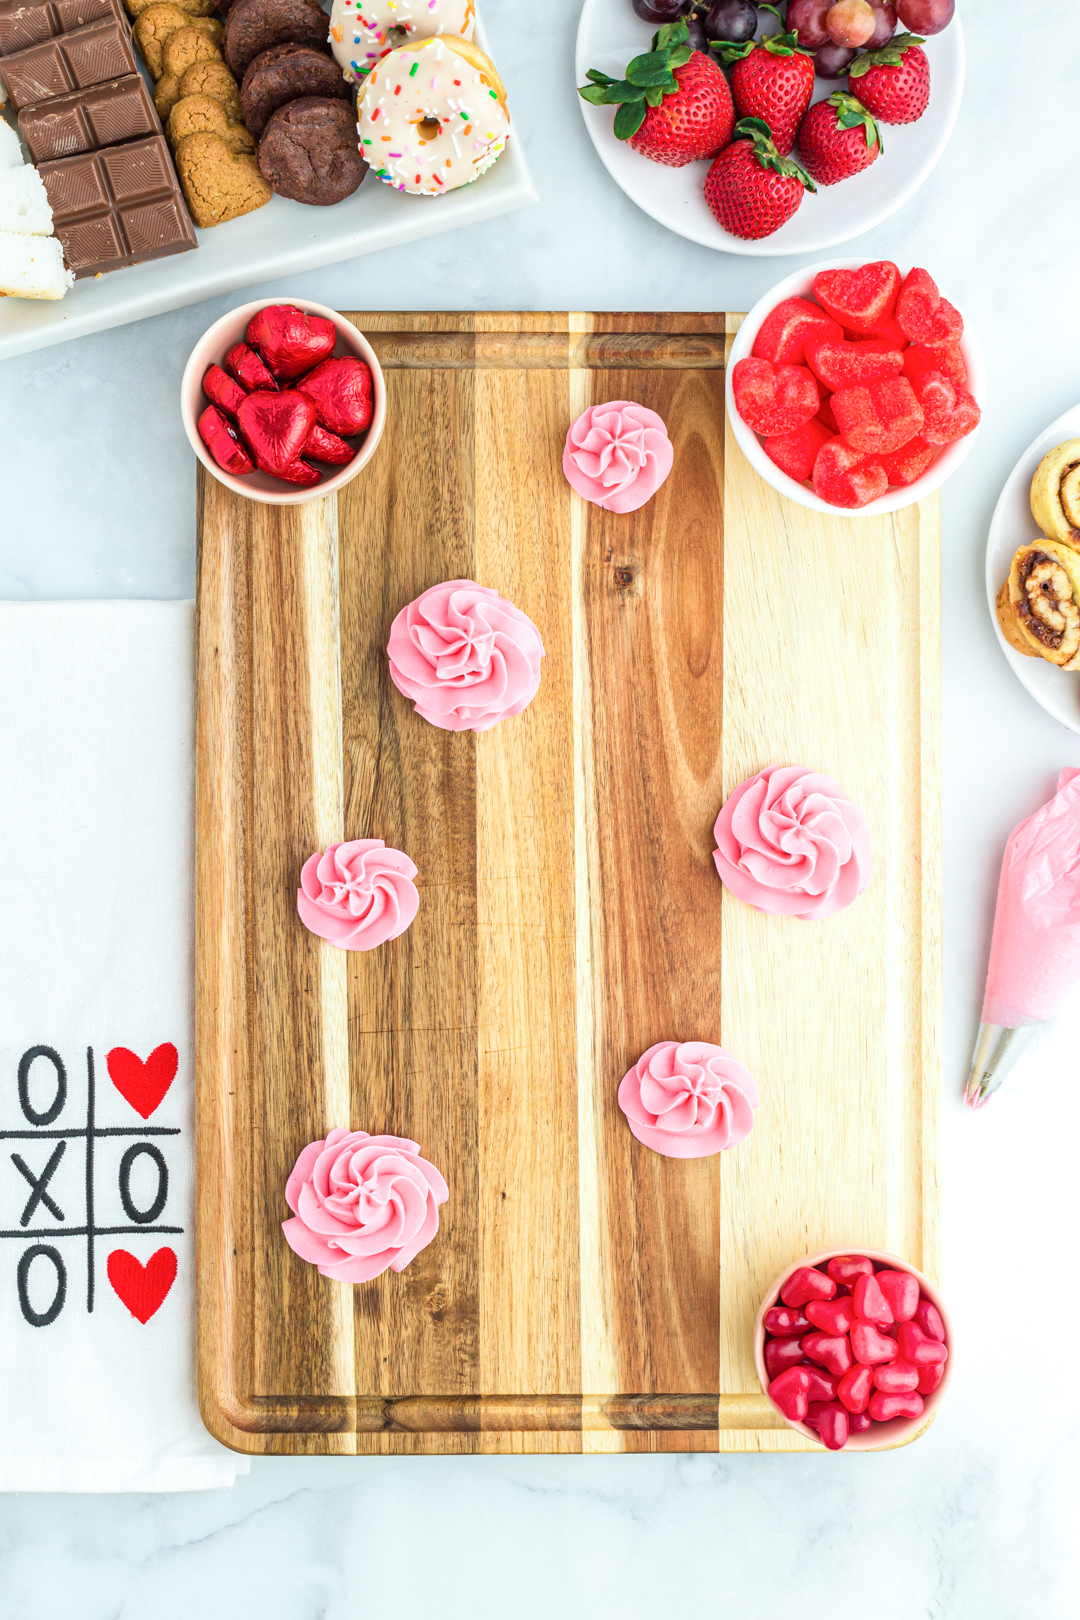 Delicious pink rosettes were artfully arranged to adorn a dessert grazing board, creating delectable excitement for what was soon to come.